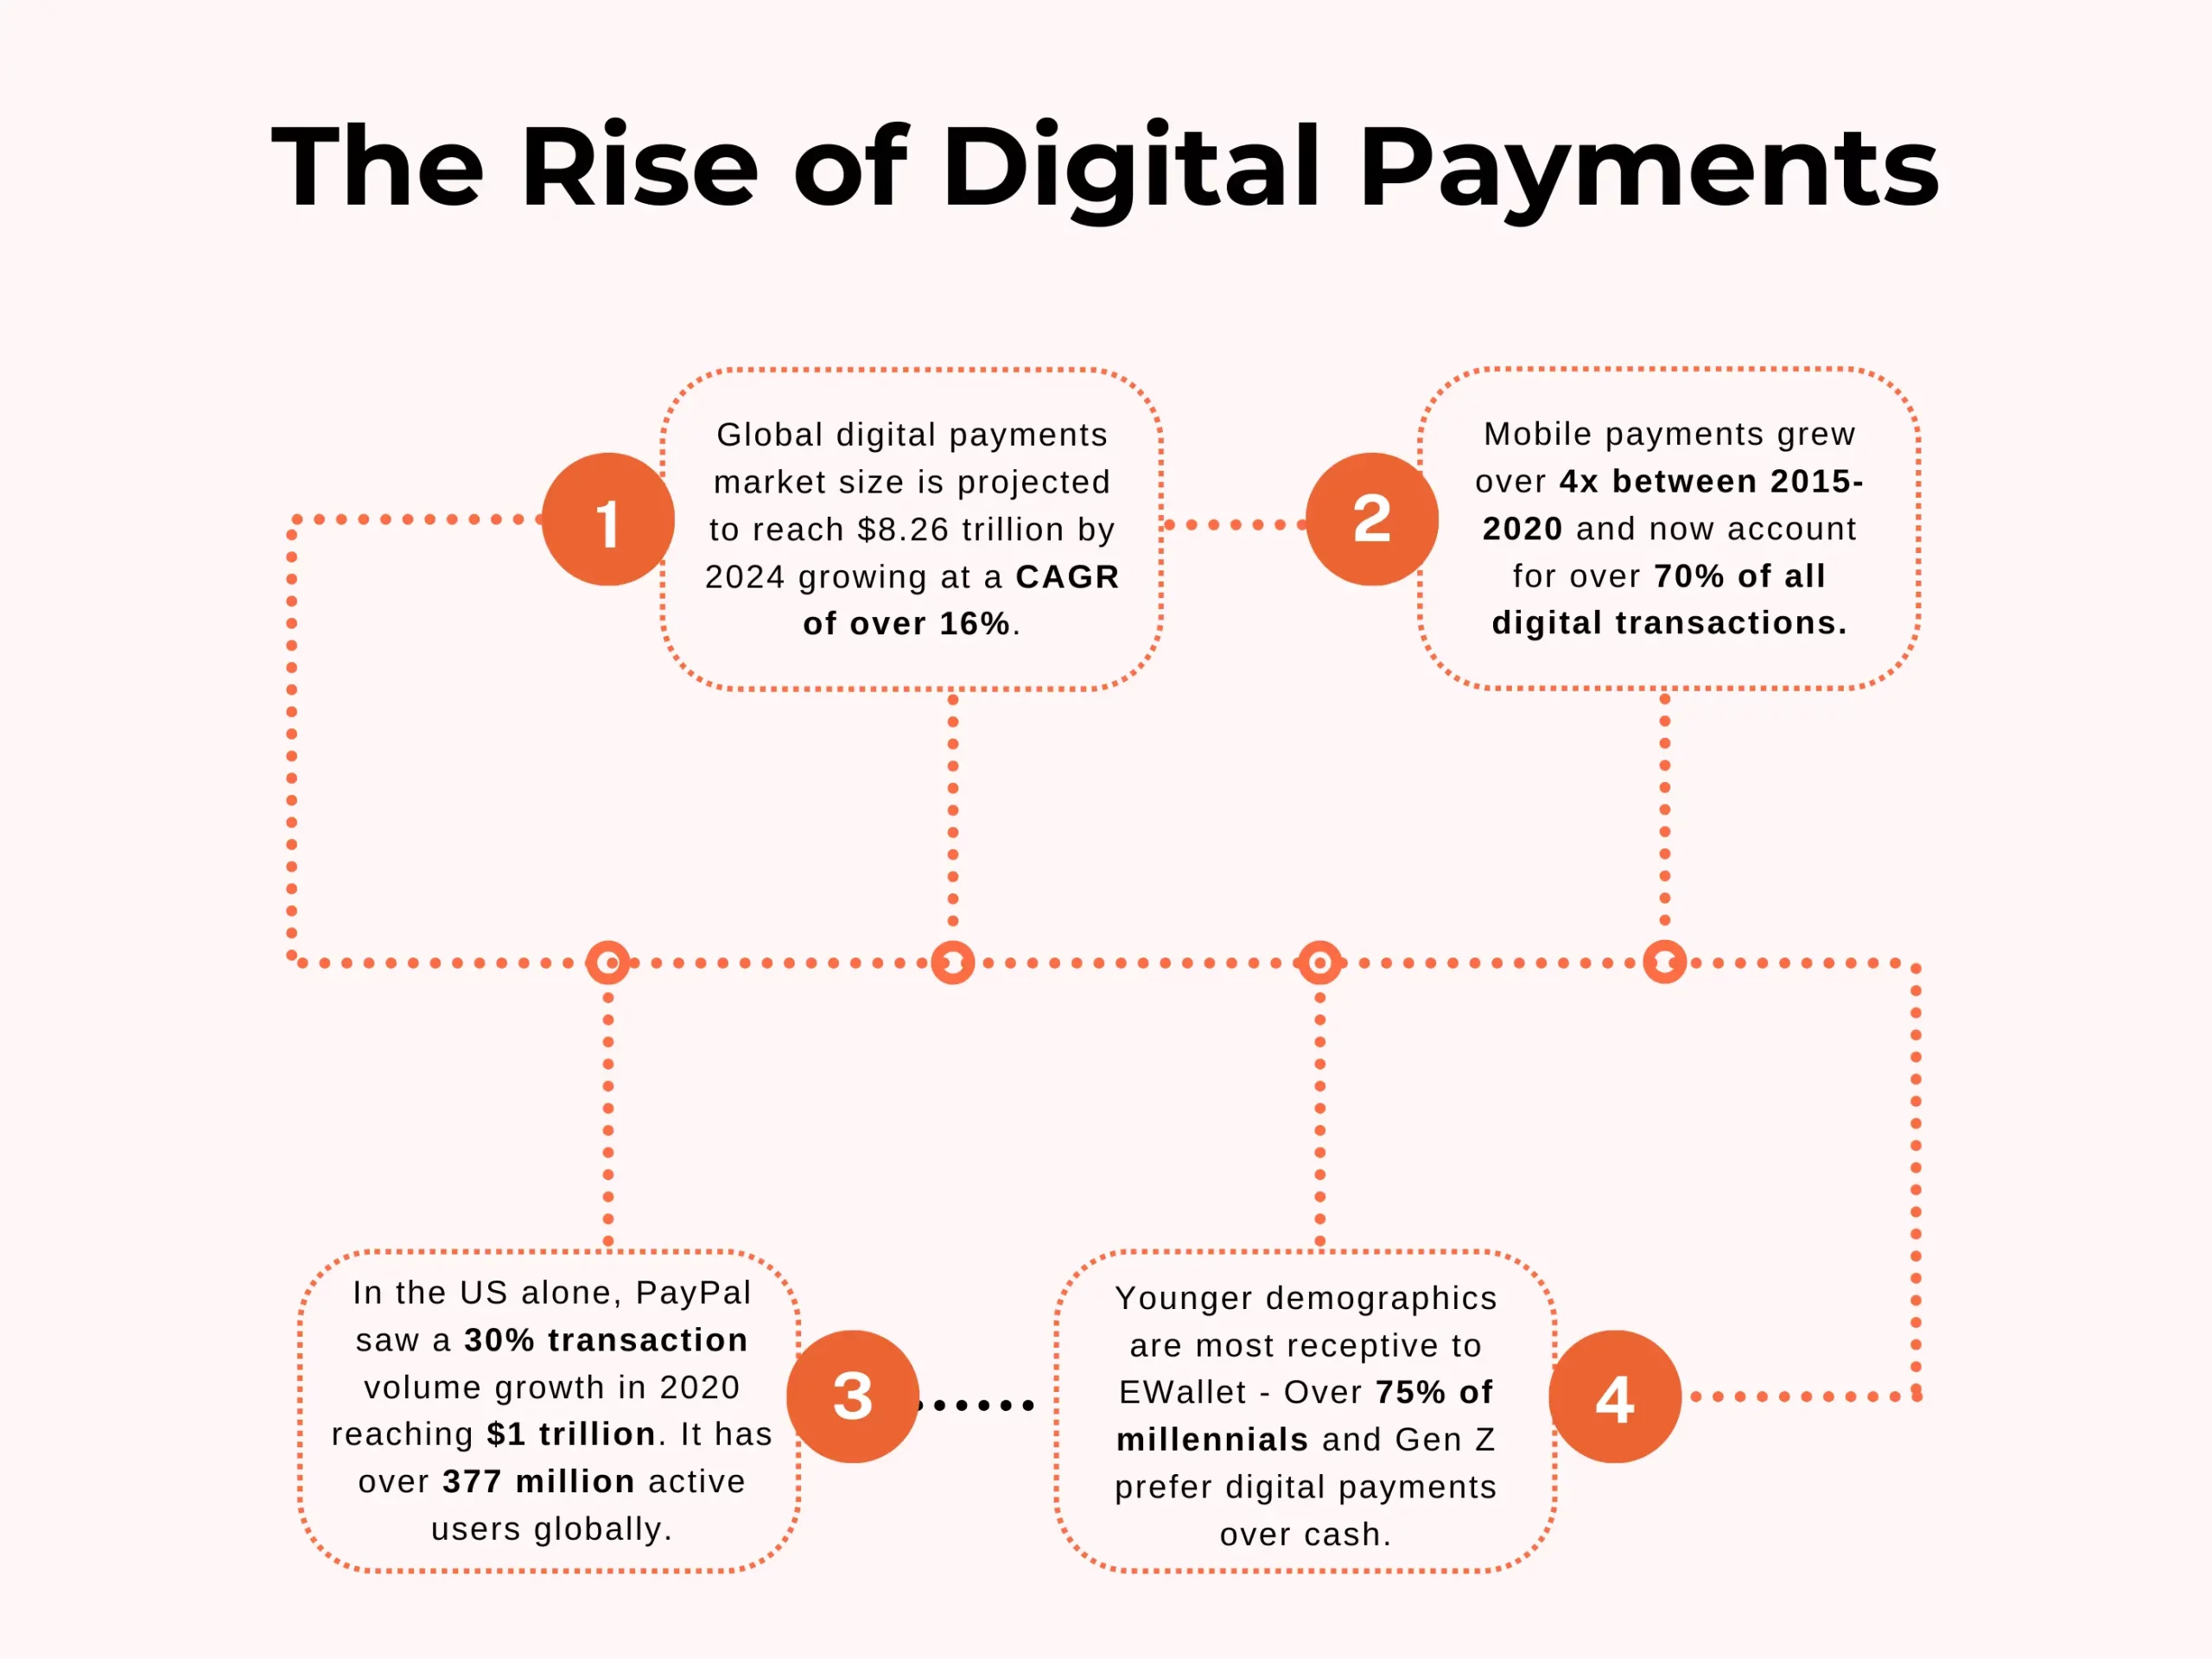 The Rise of Digital Payments